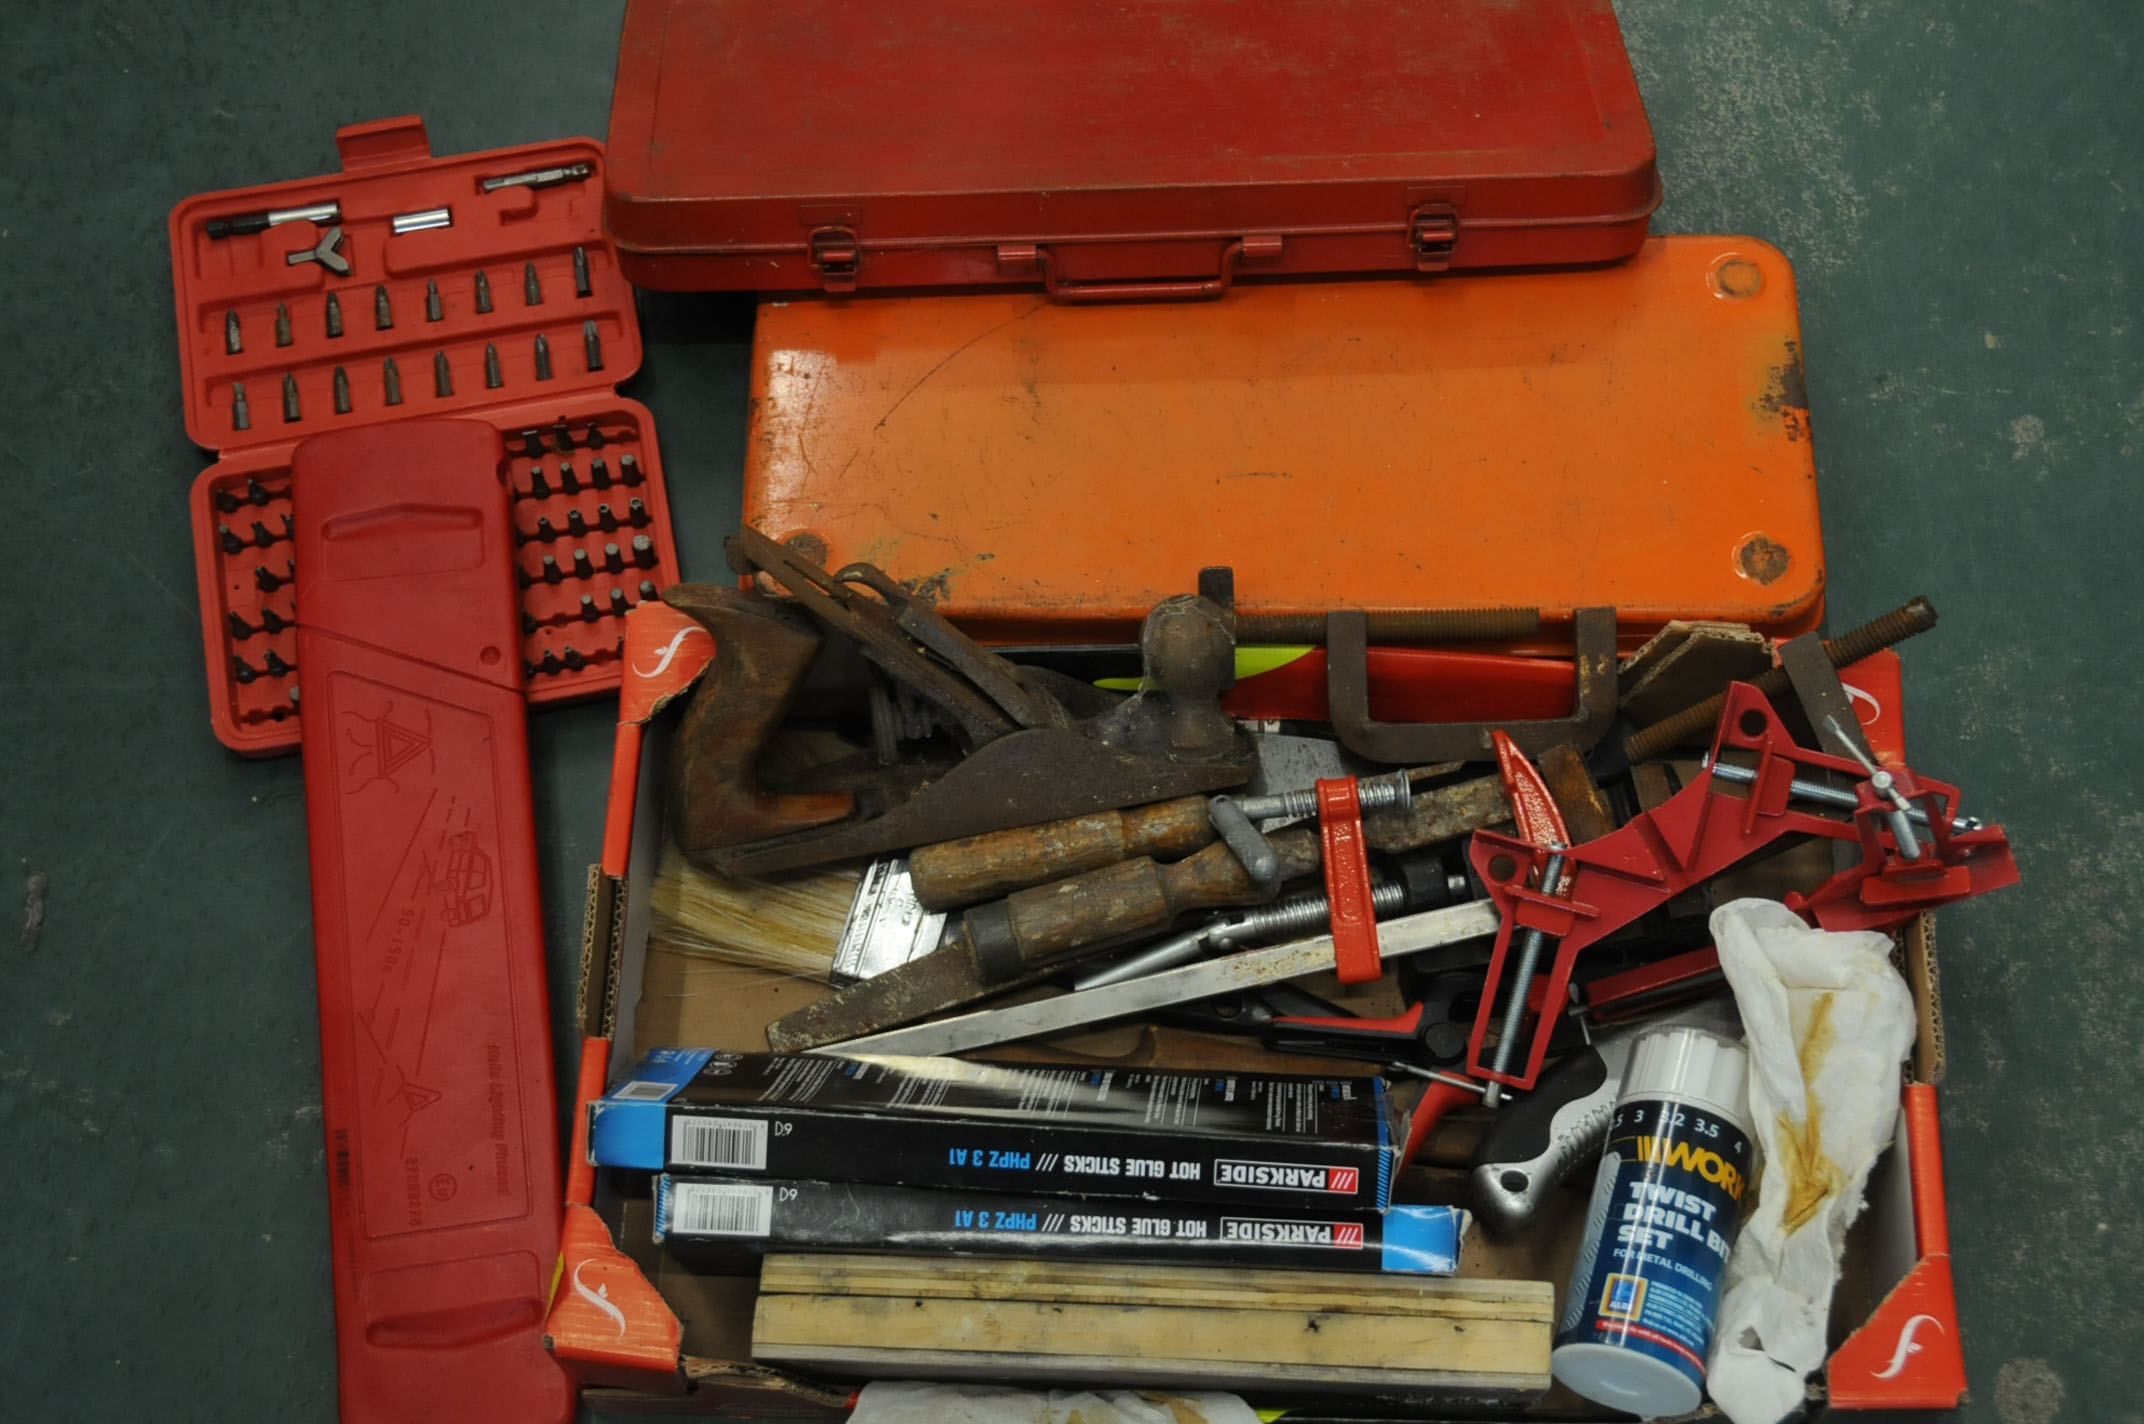 Box of toolboxes, sharpening stone, hot glue sticks, clamps, etc.